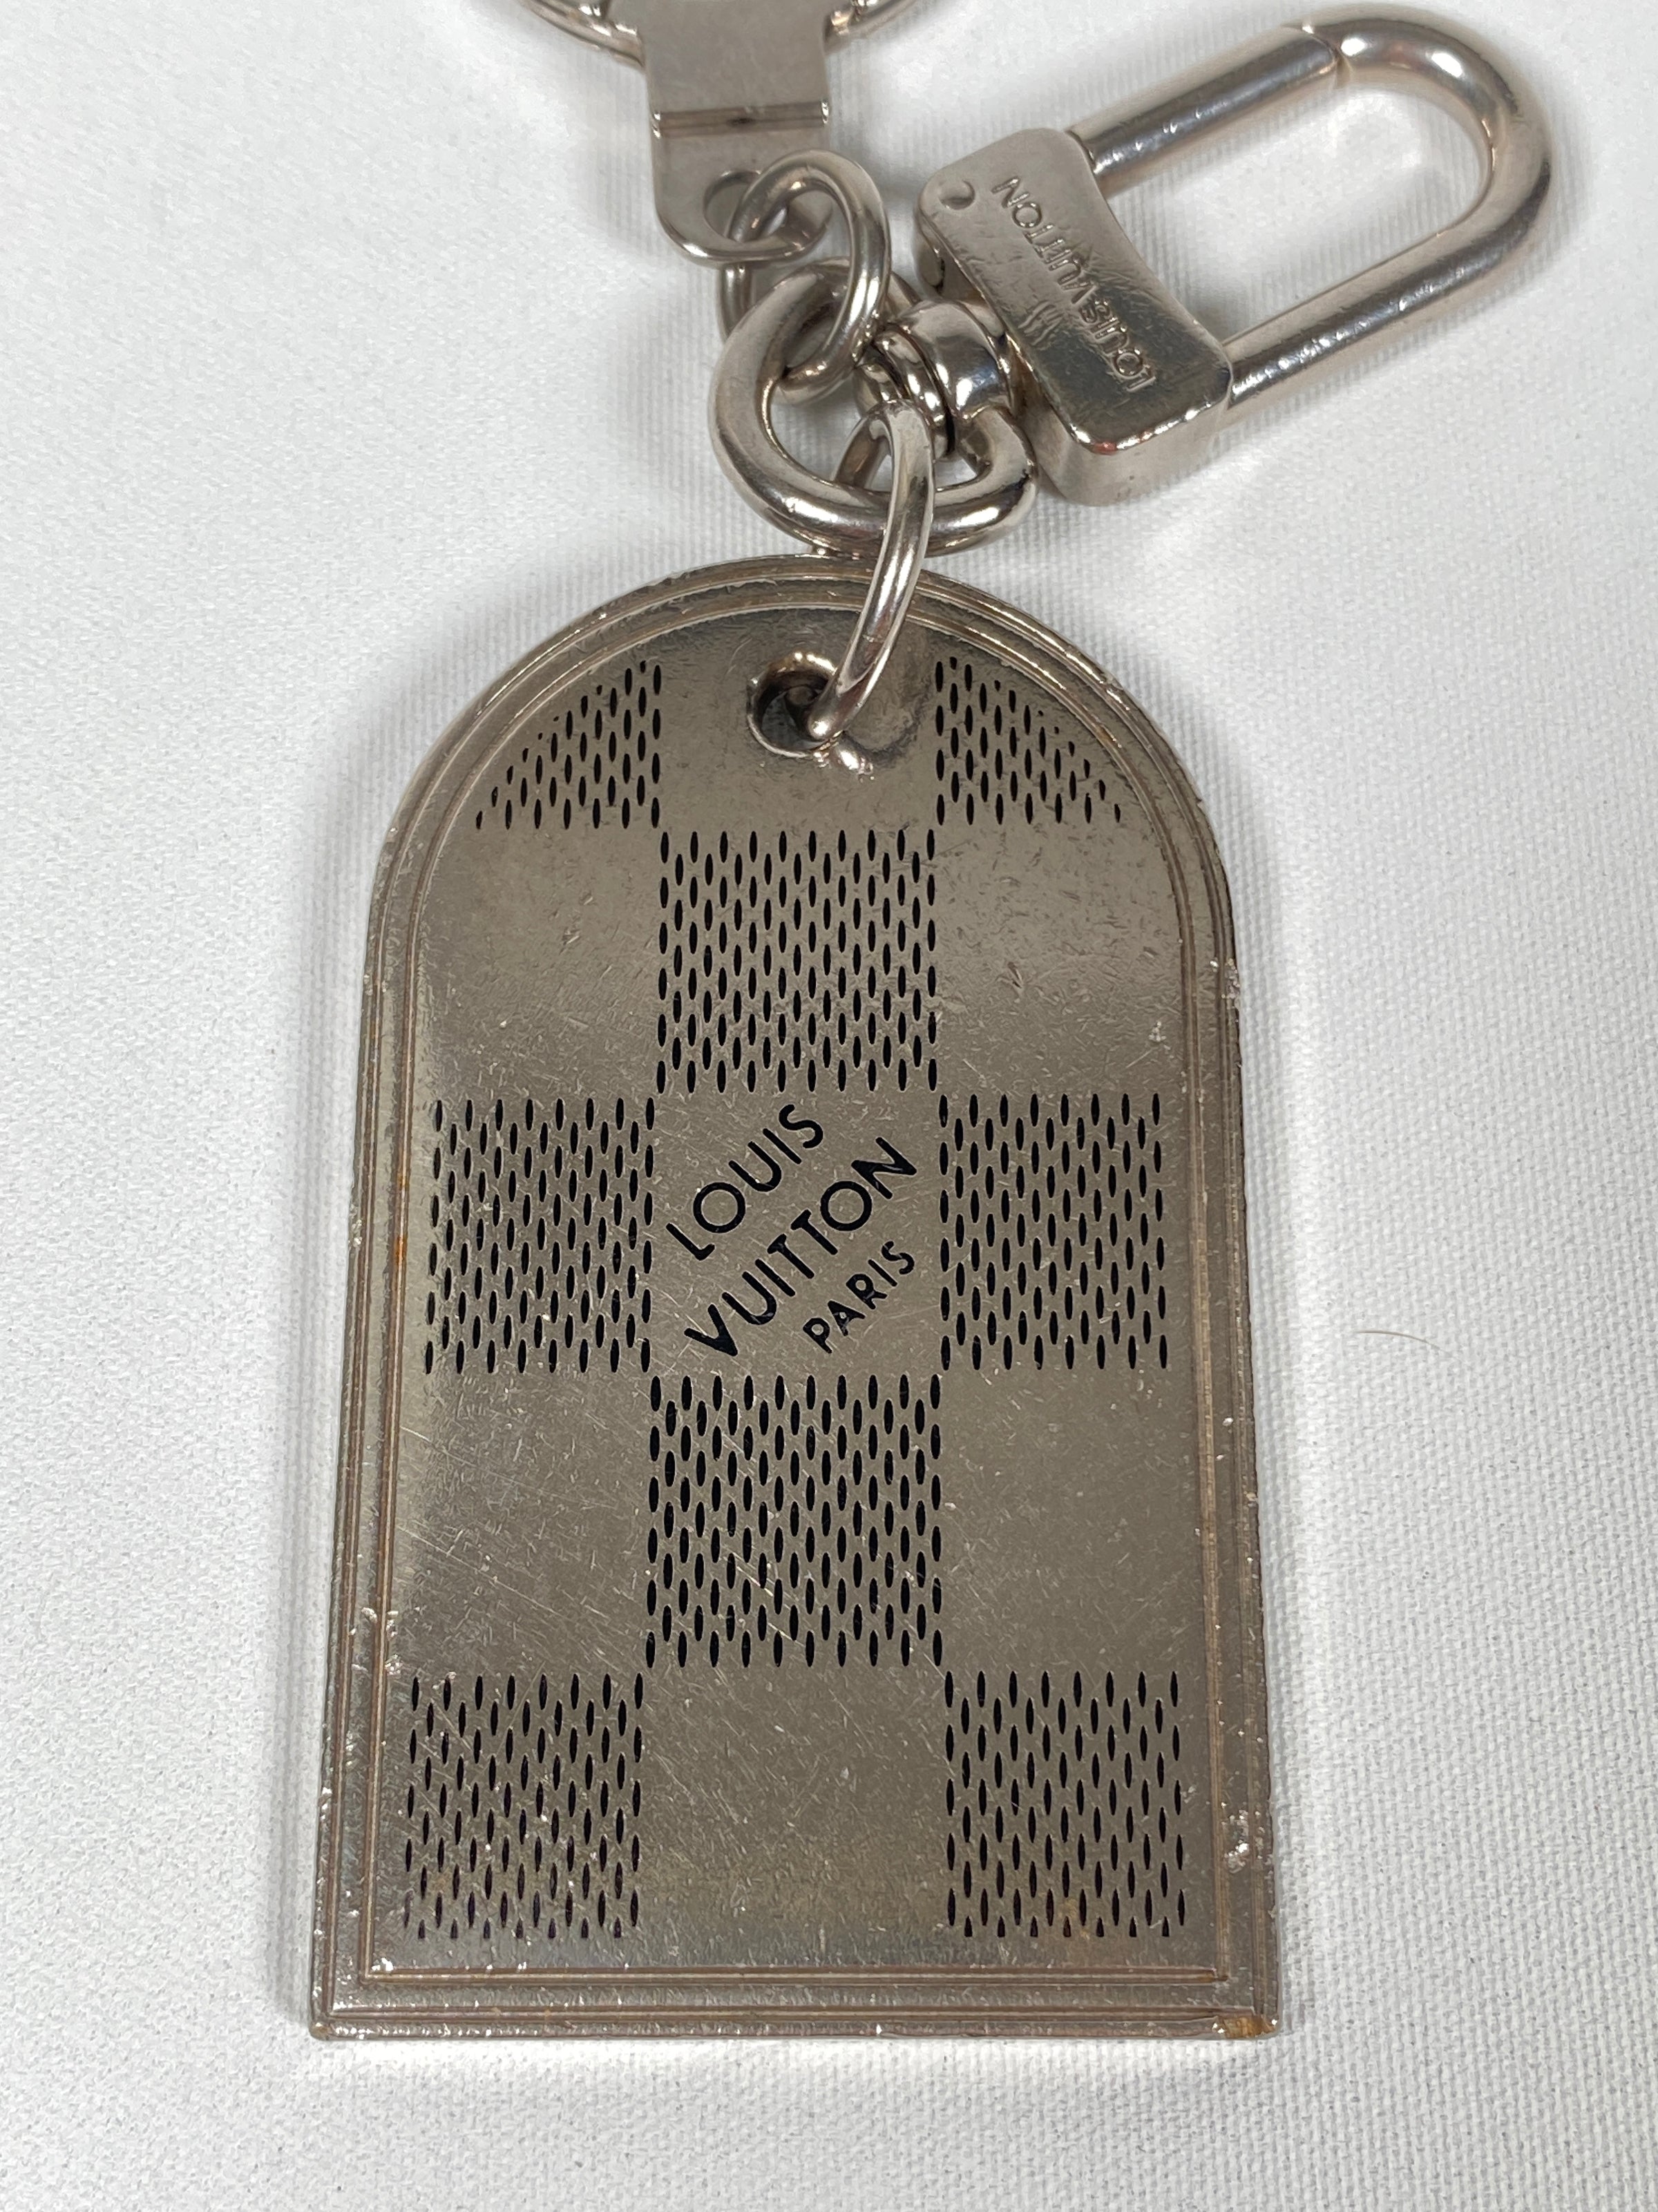 Louis Vuitton Silver Metal Luggage Tag Key Holder and Bag Charm